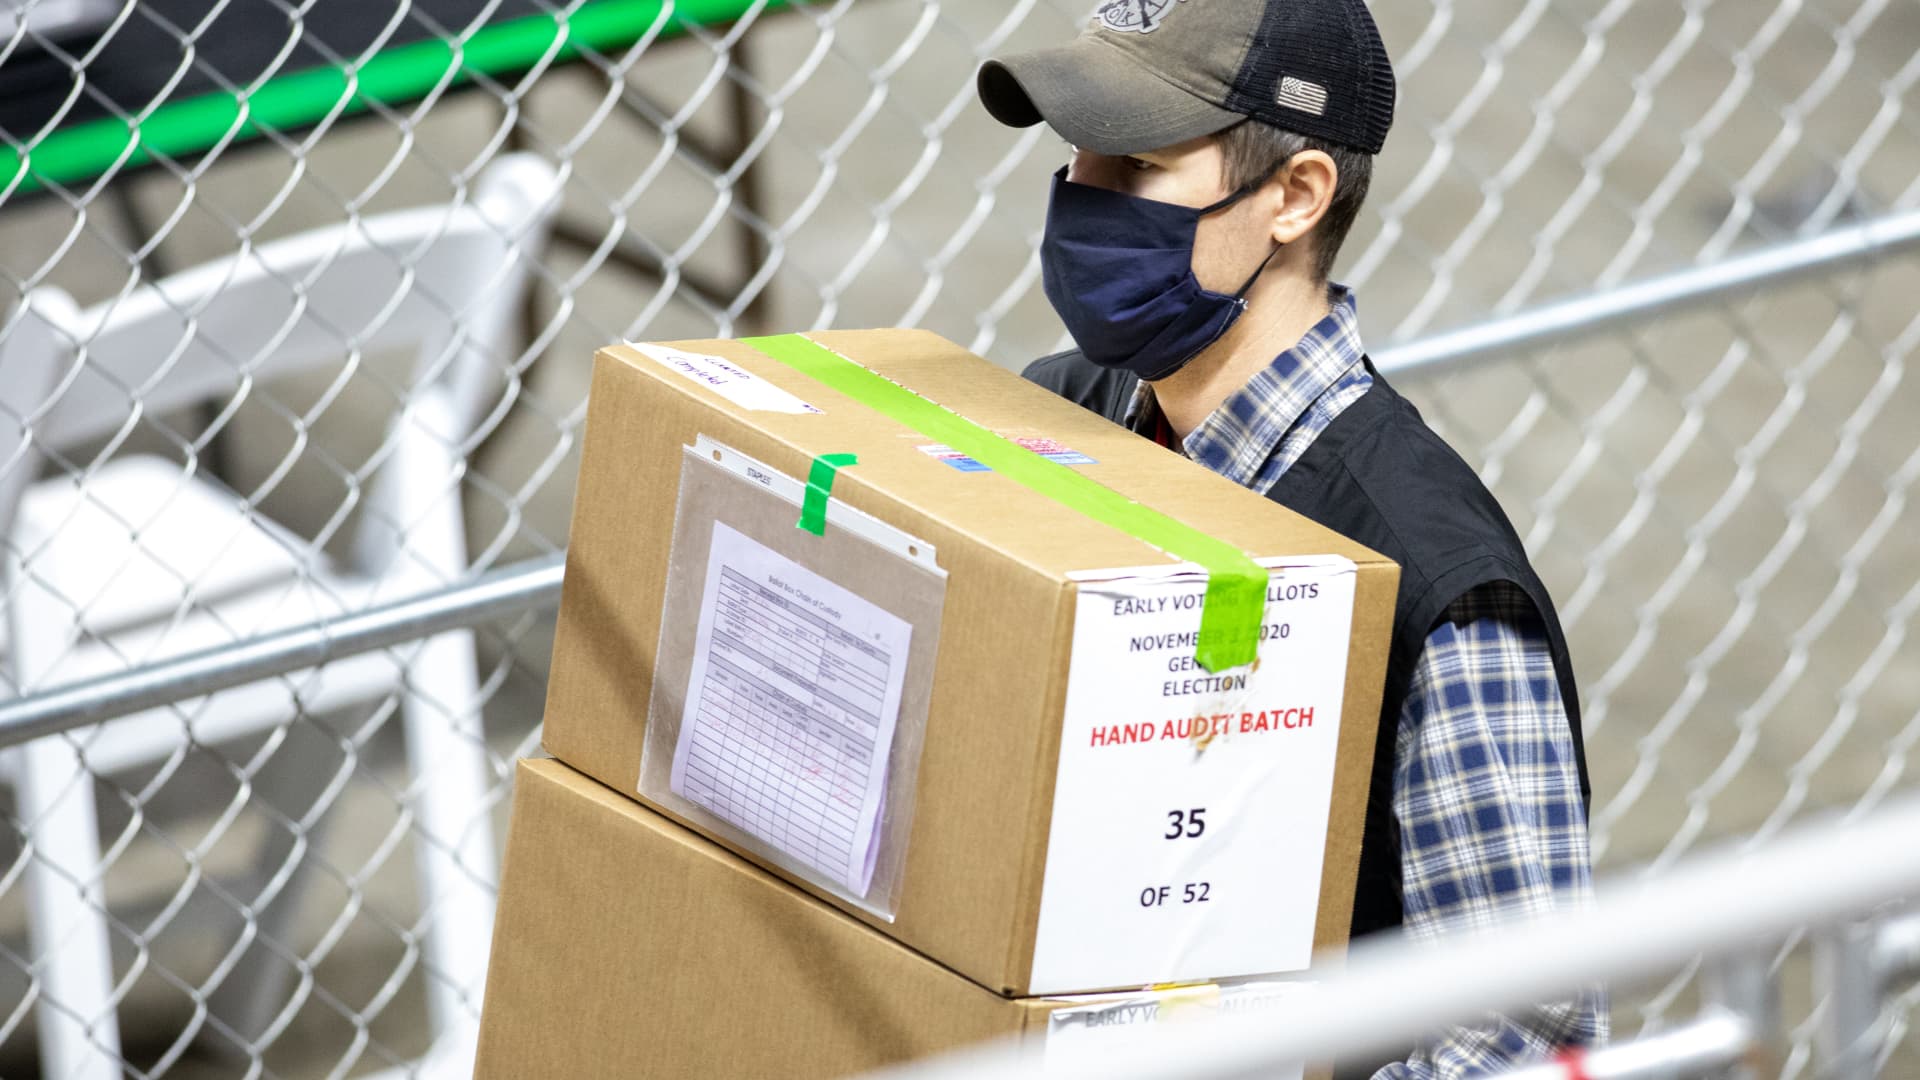 A contractor working for Cyber Ninjas, who was hired by the Arizona State Senate transports ballots from the 2020 general election at Veterans Memorial Coliseum on May 1, 2021 in Phoenix, Arizona.